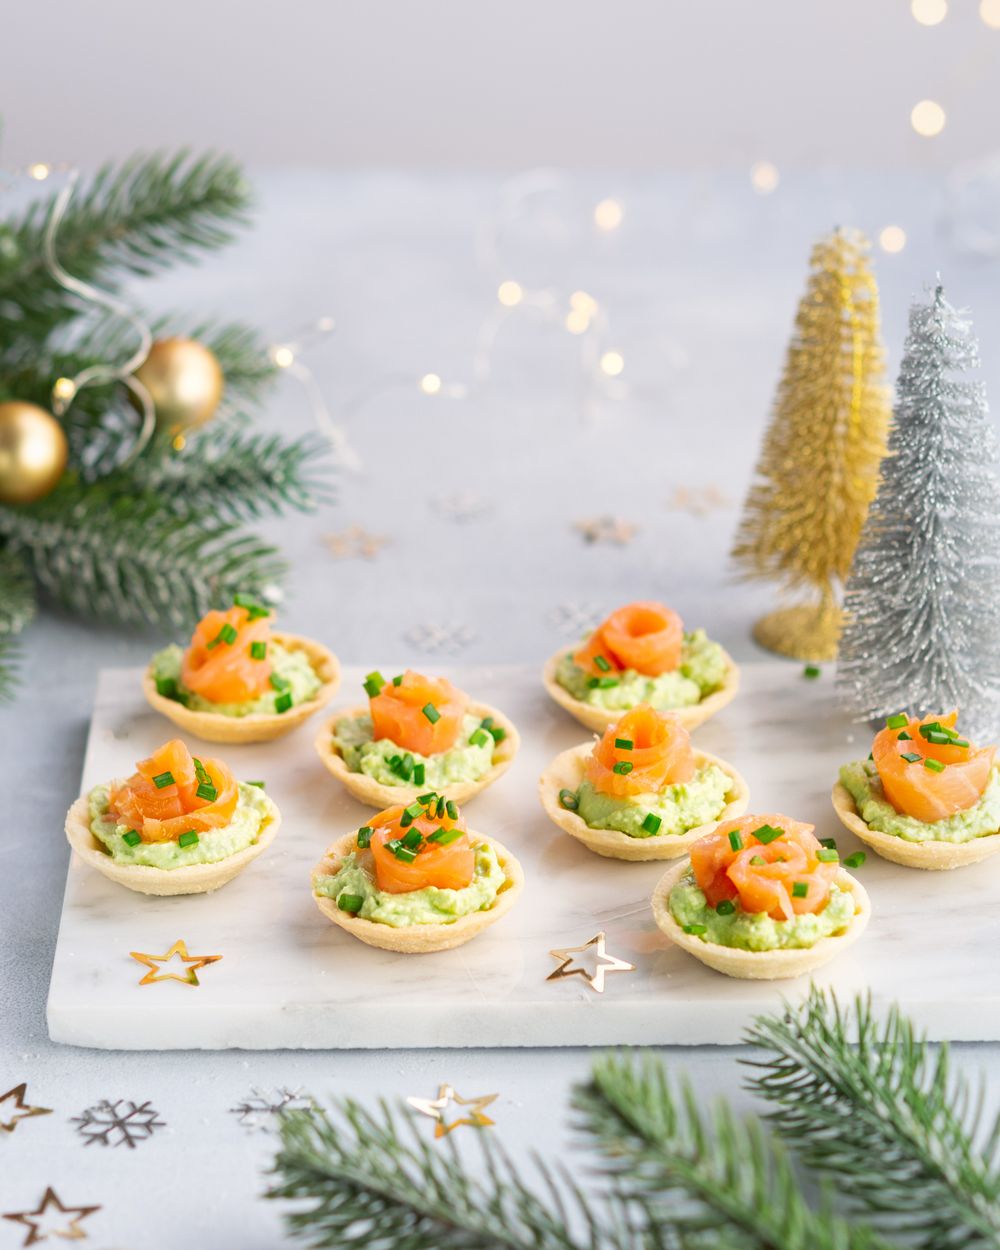 Smoked salmon, cream cheese & avocado canapes christmas appetizers